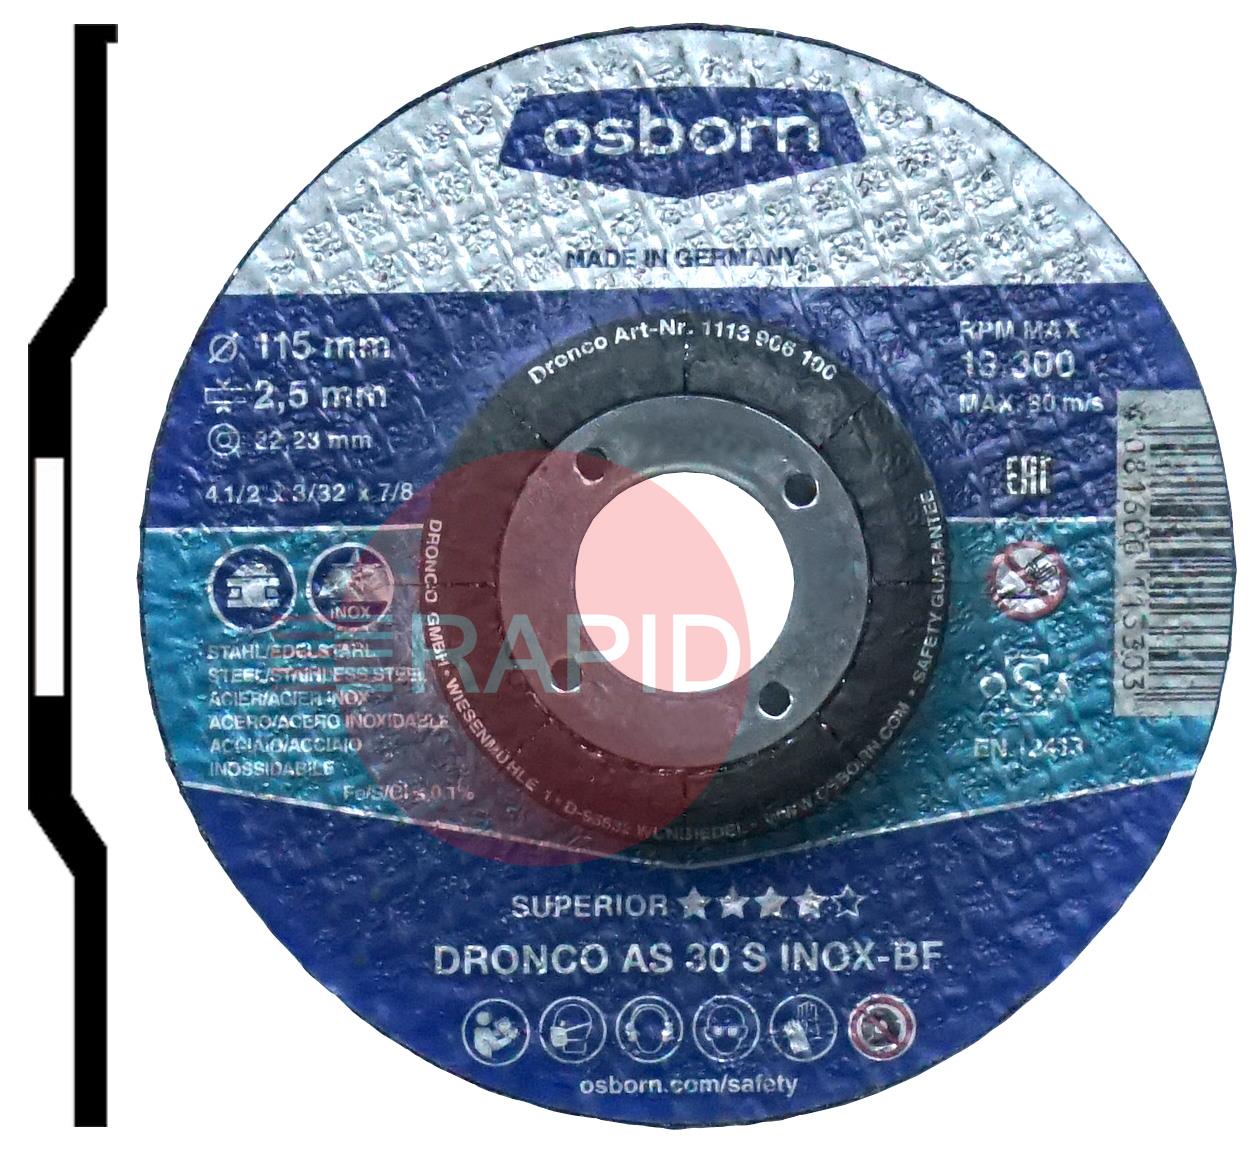 412MC  Dronco 115mm (4.5) Depressed Centre Cutting Disc 2.5mm Thick. Grade AS 30 S Inox-BF For Steel & Stainless Steel.